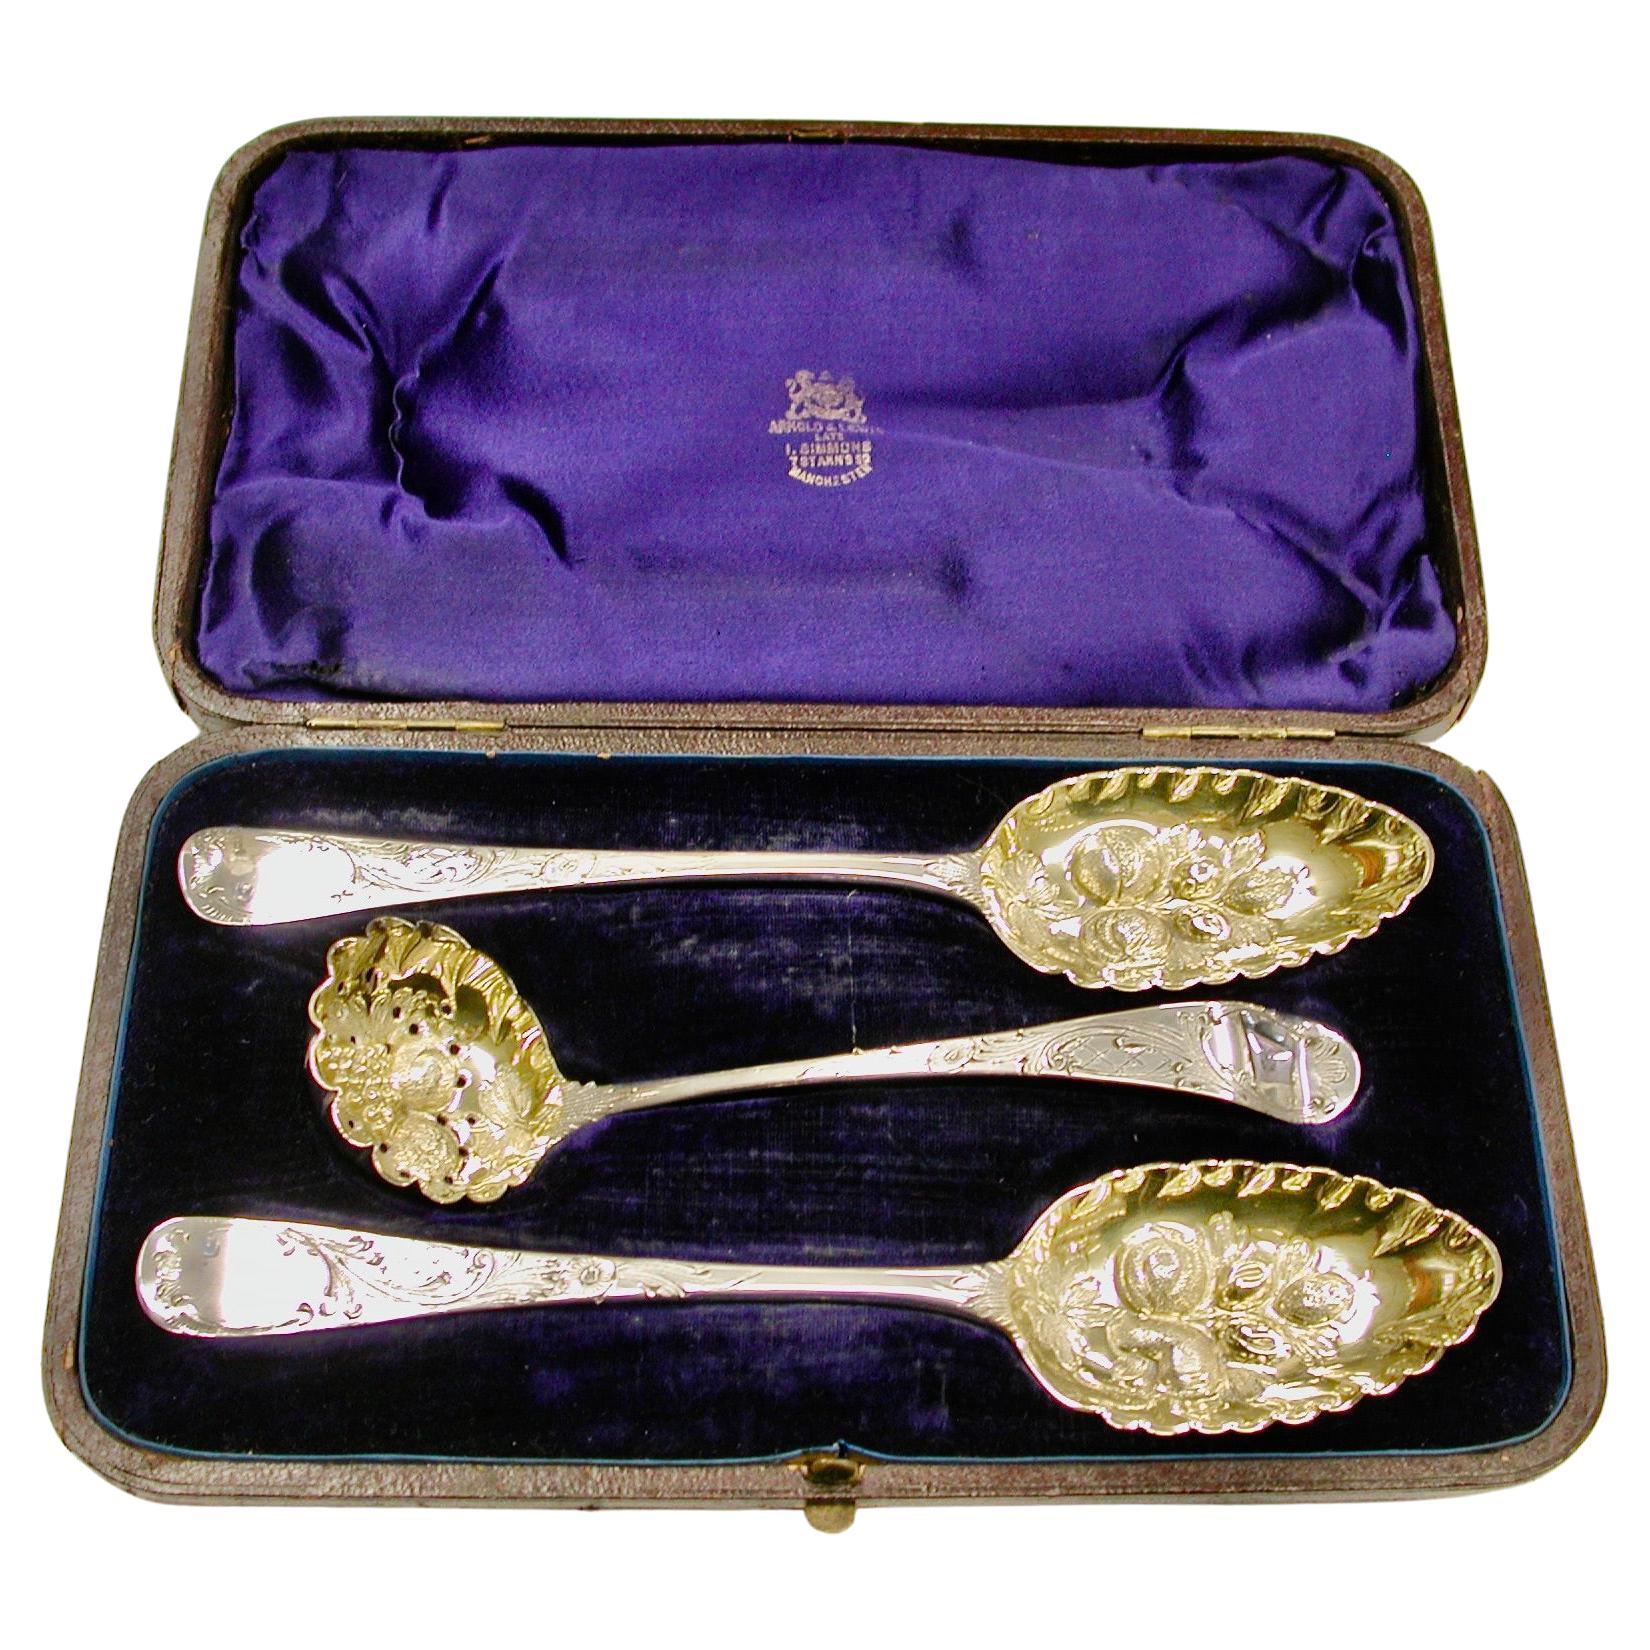 Pair of George 111 Silver Berry Spoons with Matching Sugar Sifter, 1799-1805